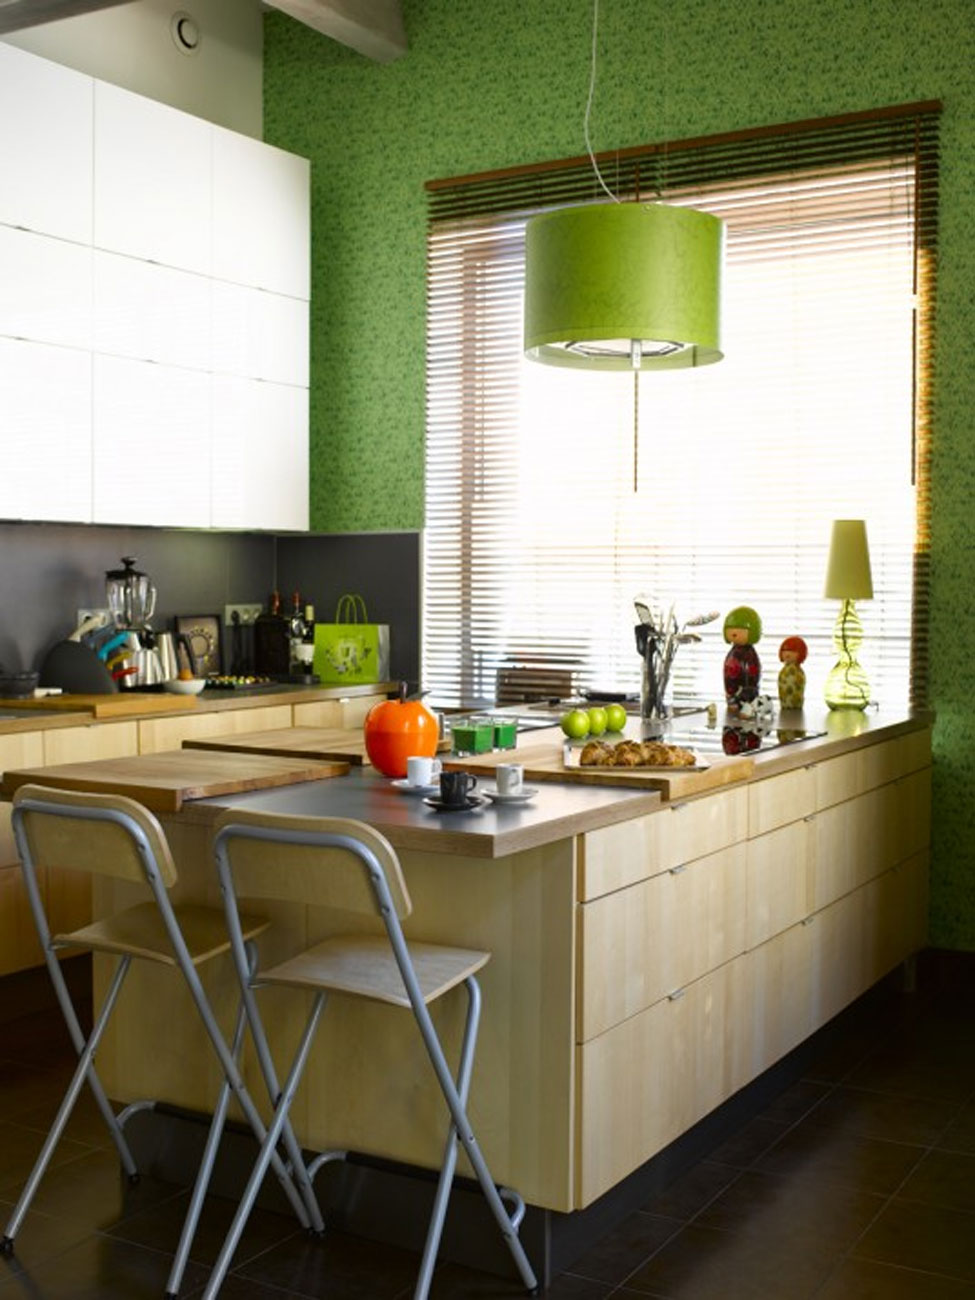 Kitchen Design Ikea Small Kitchen Design With Interesting IKEA Furniture Ideas Also Simple Wooden Table Design And Fresh Green Hanging Lamp Design Along With Amazing Green Wall Paint Color Design Kitchen The Balance Between The Small Kitchen Design And Decoration